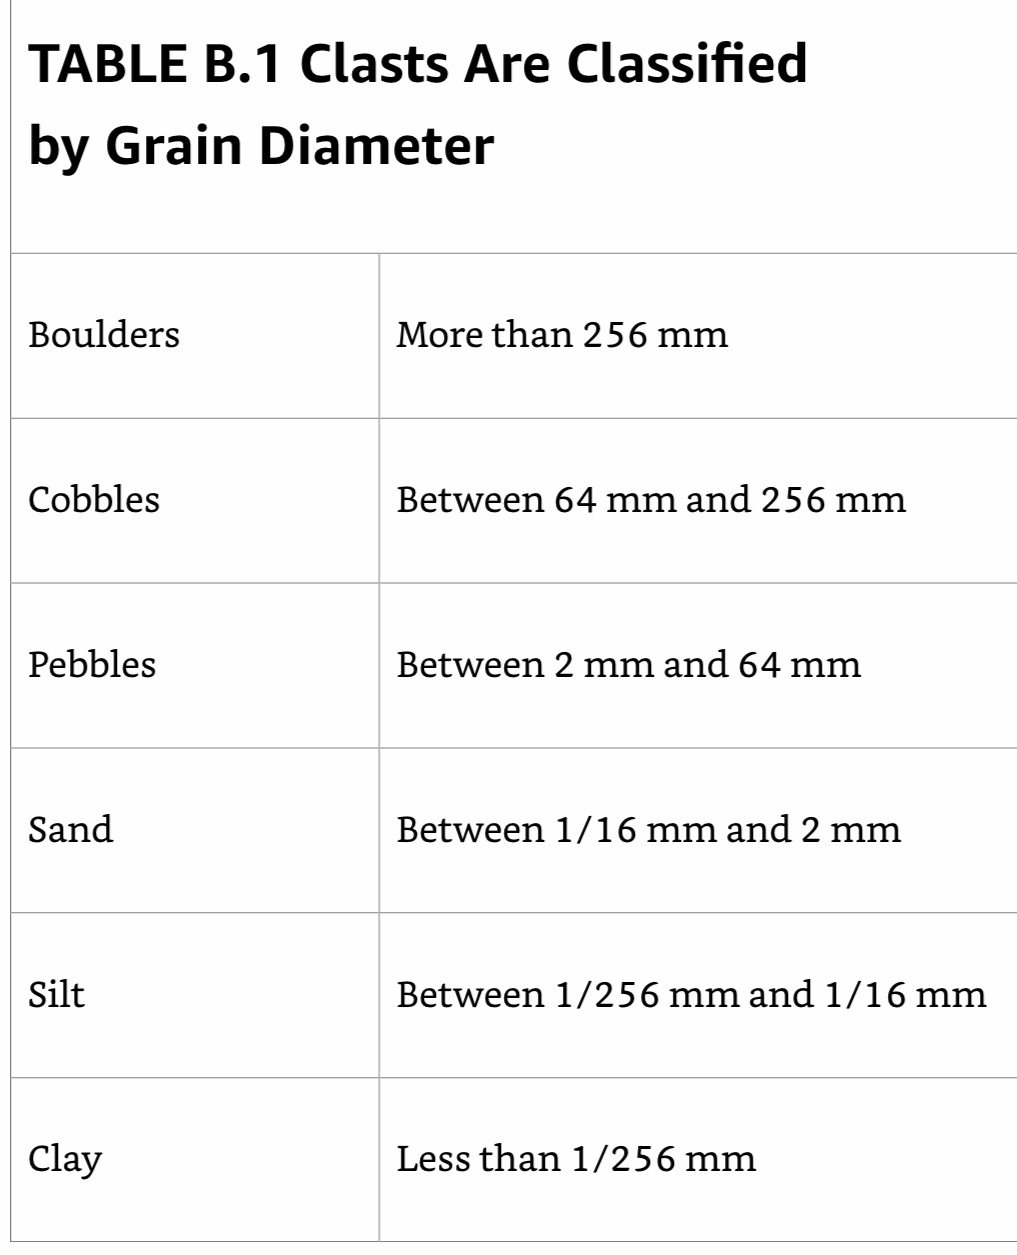 Clasts by Grain Size.jpeg